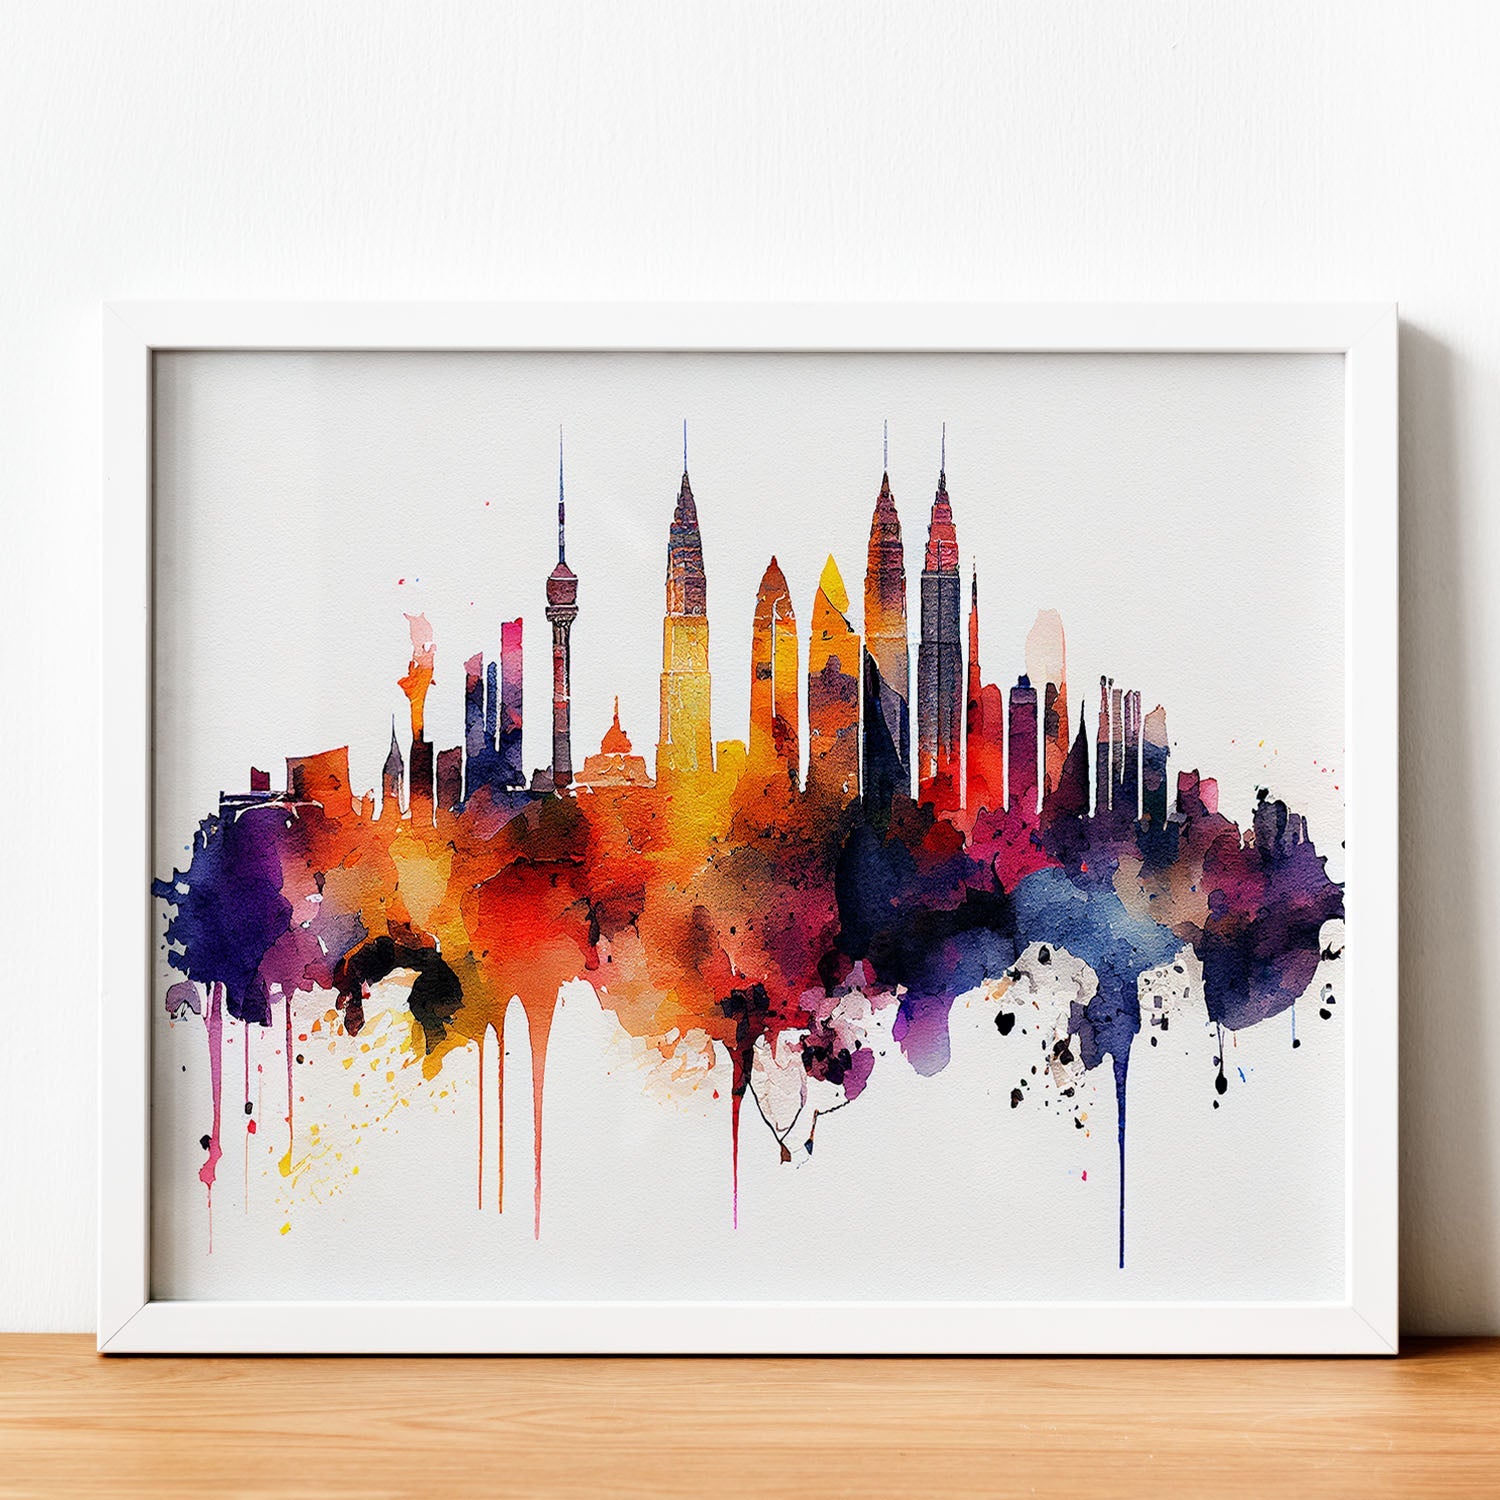 Nacnic watercolor of a skyline of the city of Kuala Lumpur_2. Aesthetic Wall Art Prints for Bedroom or Living Room Design.-Artwork-Nacnic-A4-Sin Marco-Nacnic Estudio SL